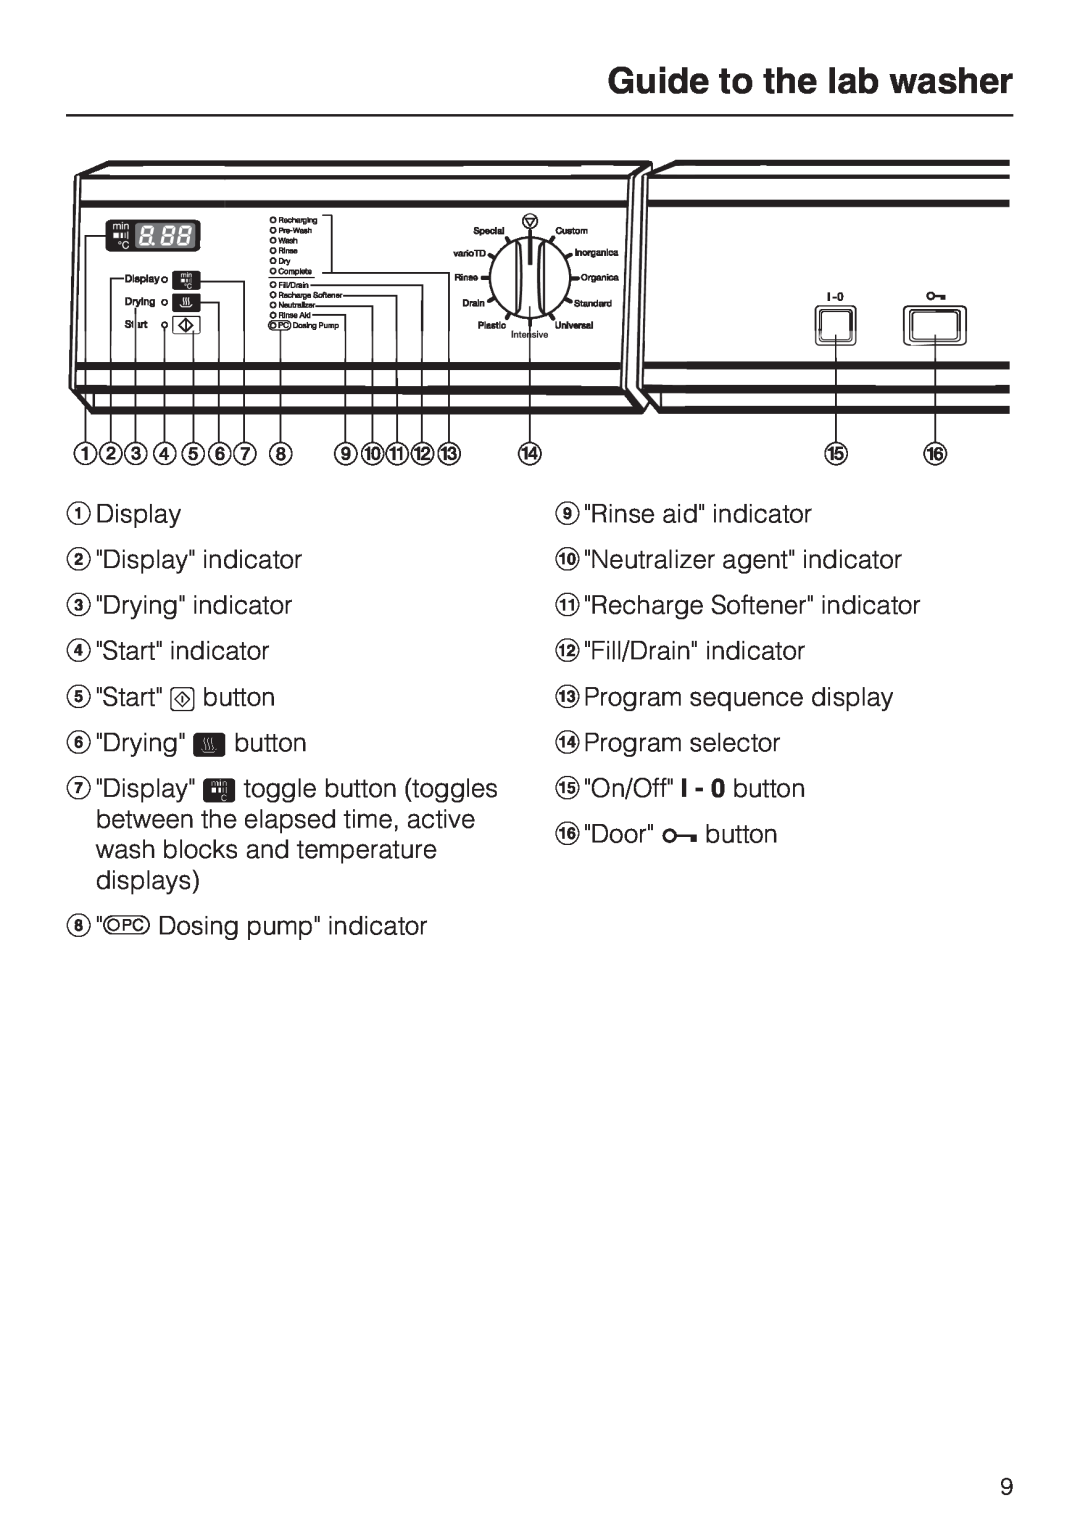 Miele G 7883 CD installation instructions Guide to the lab washer 